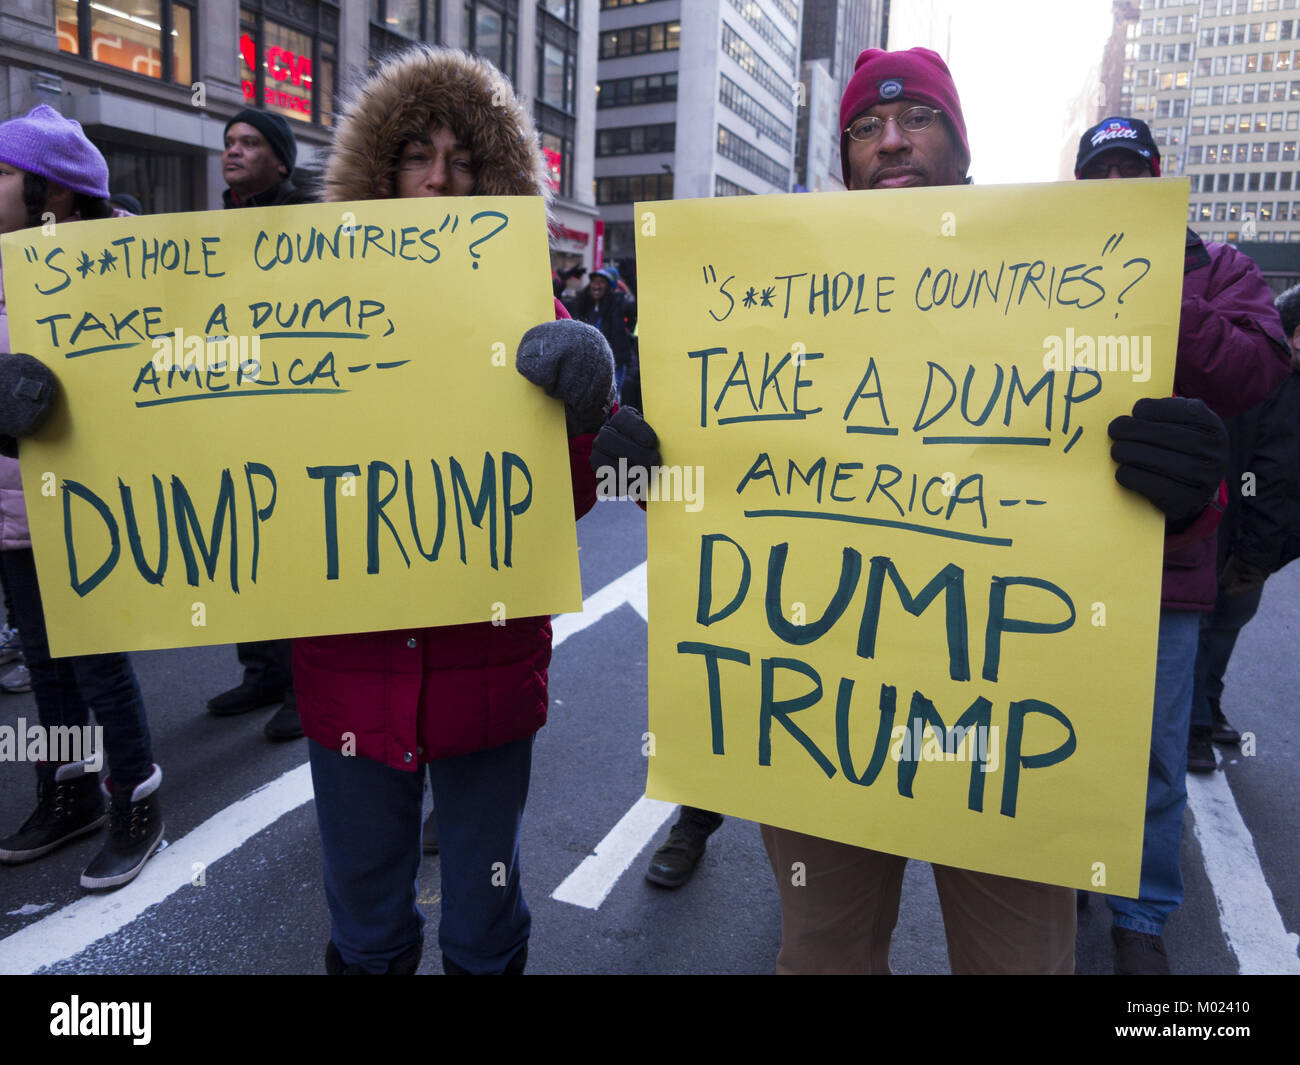 Rally Against Racism: Stand Up for Haiti and Africa in Times Square in NYC on Jan.15, 2018, Martin Luther King Day. Stock Photo